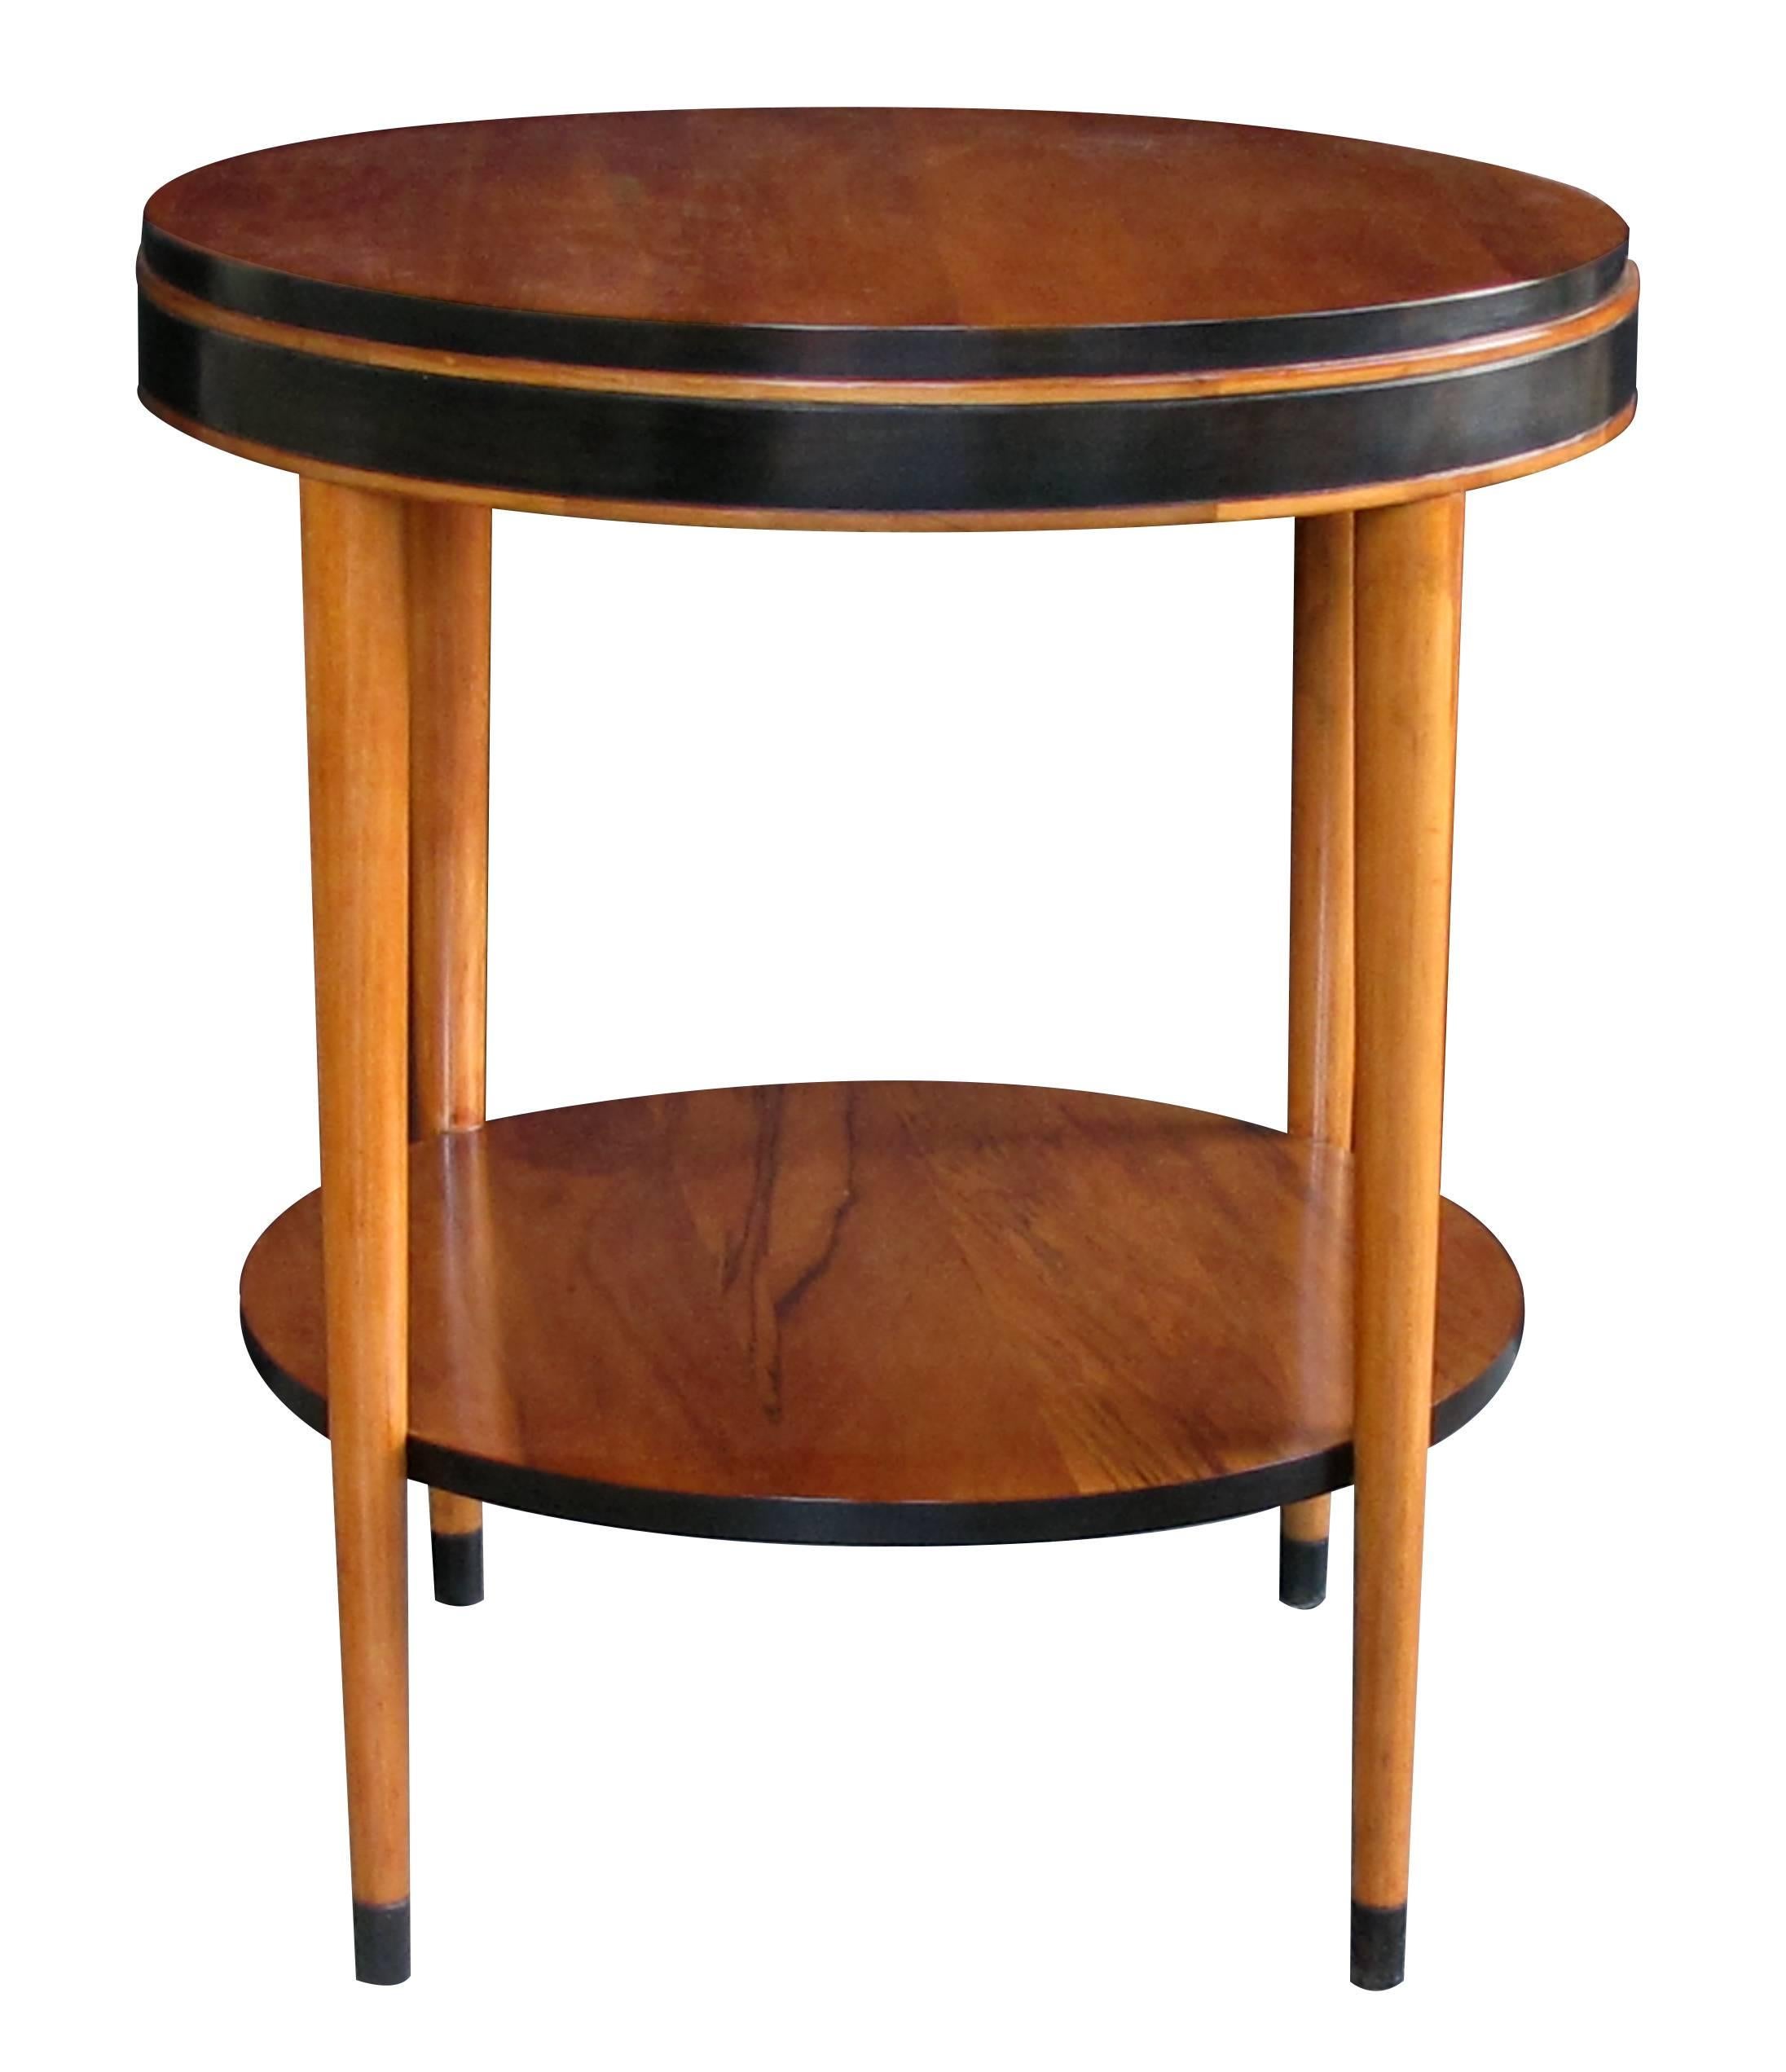 A sleek and stylish American Mid-Century Modern ash circular side table with ebonized highlights; chic and tailored in style, this circular table with stepped apron raised on tapering turned supports connected by a lower shelf.